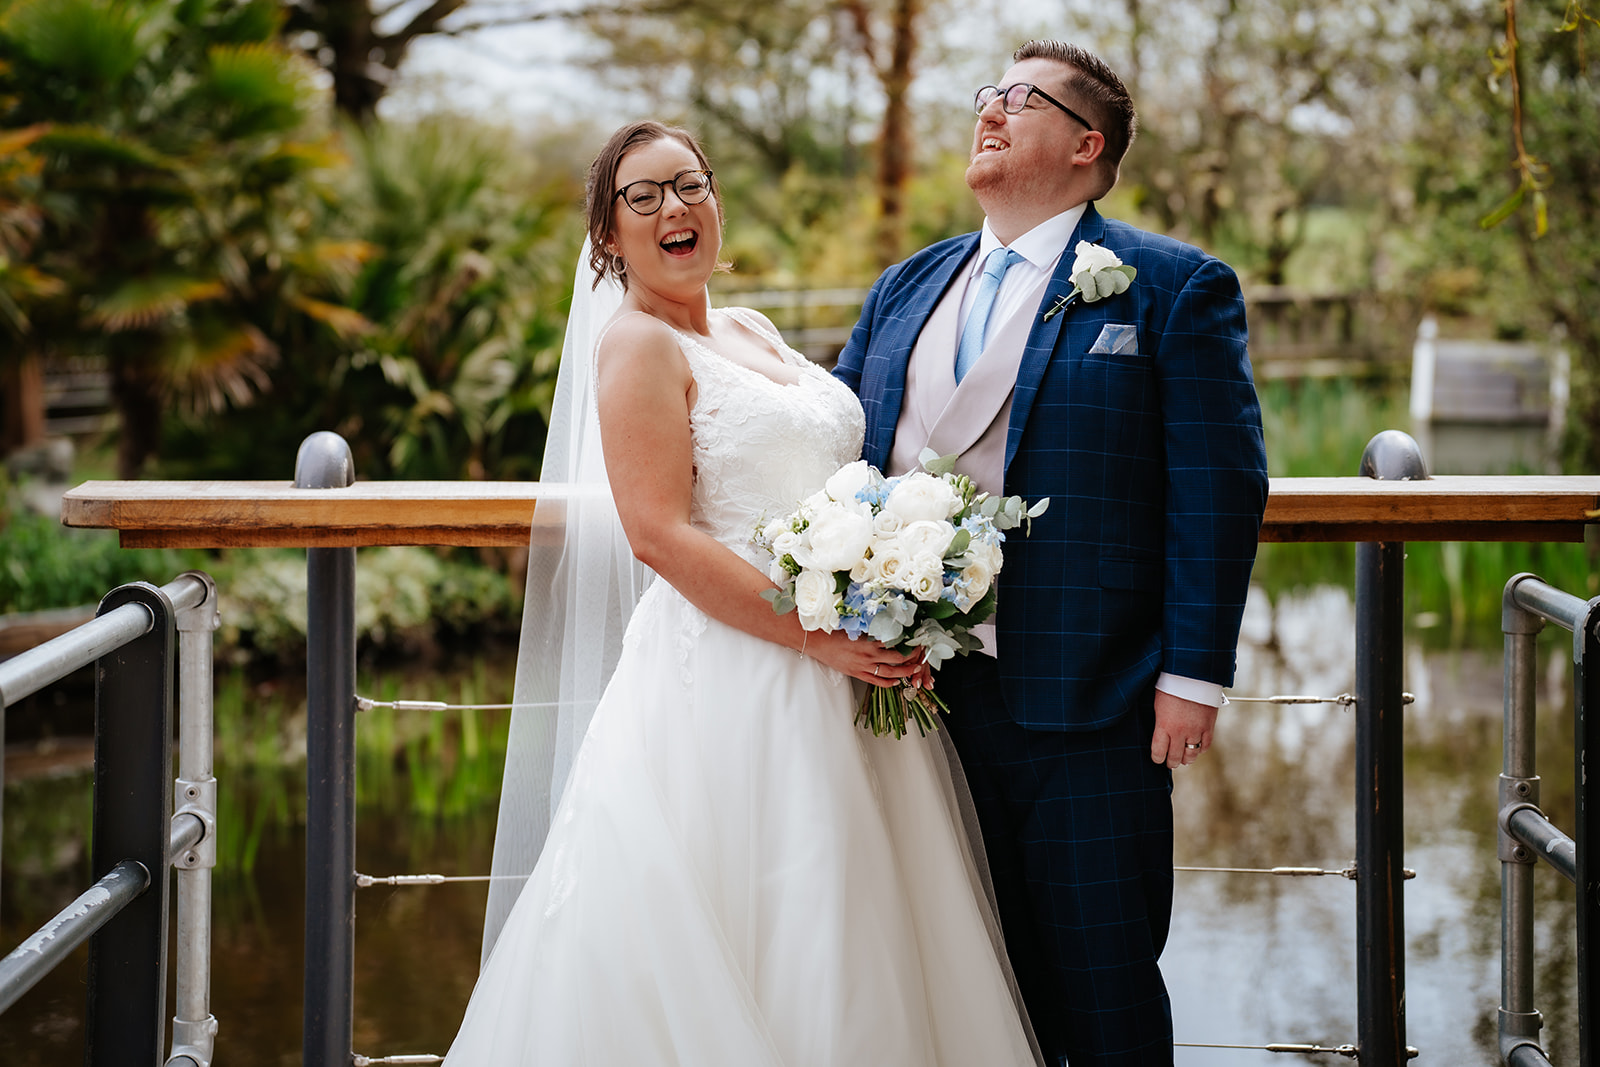 Couple share a fun moment of laughs after their ceremony at the Friern Manor country hotel.
